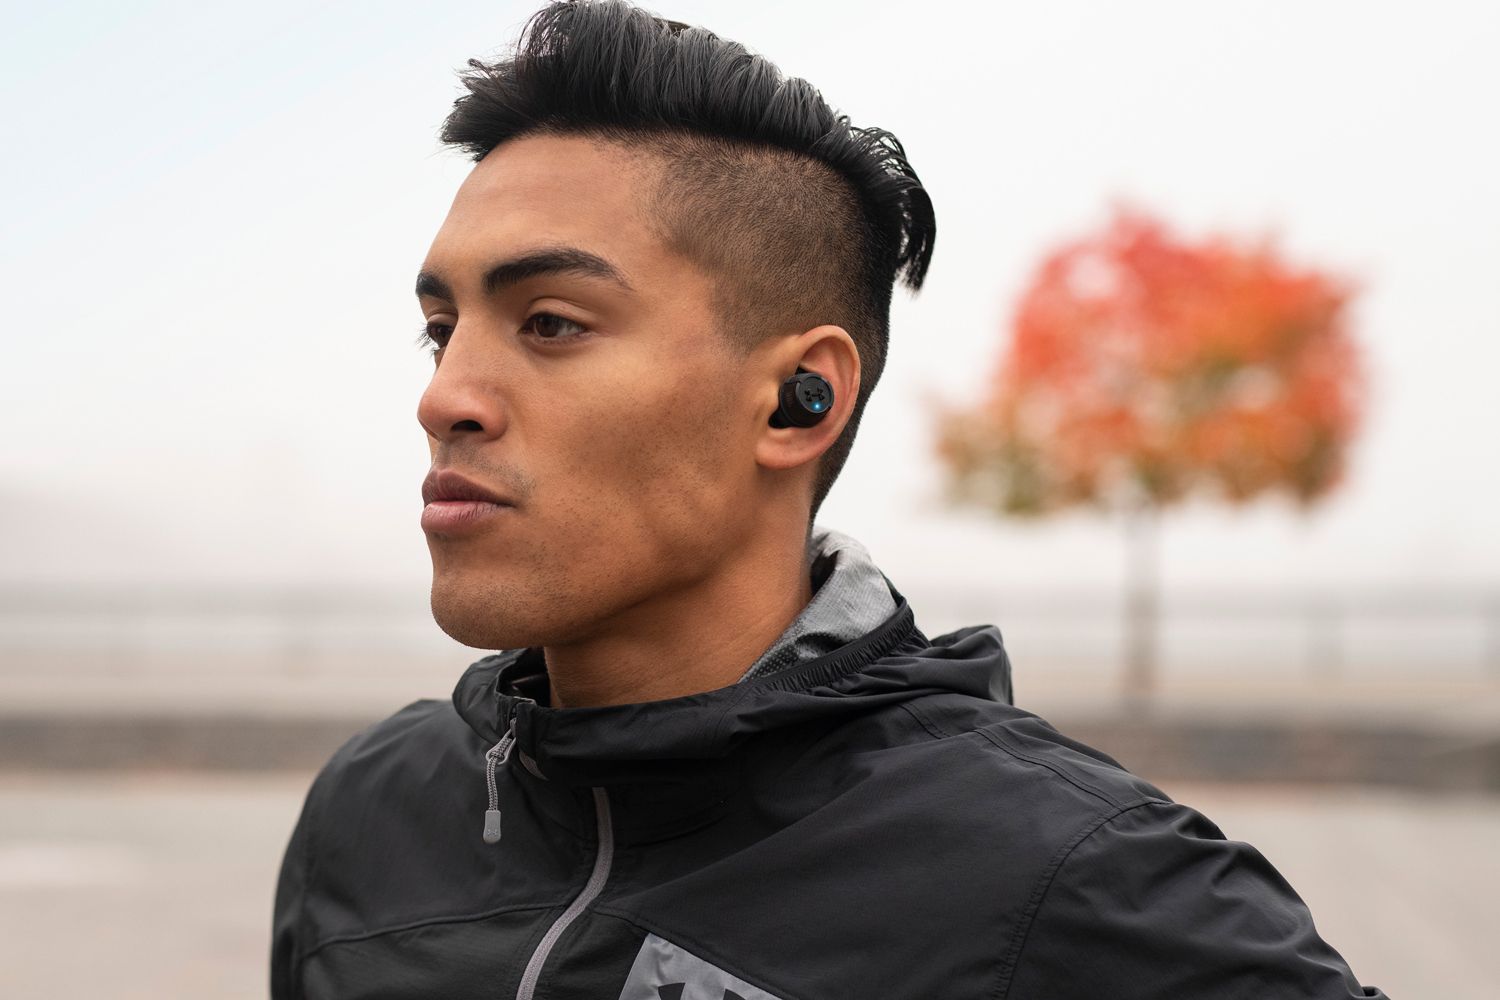 barrer vistazo Normal Hands-On Review: Under Armour True Wireless Flash X Earbuds by JBL